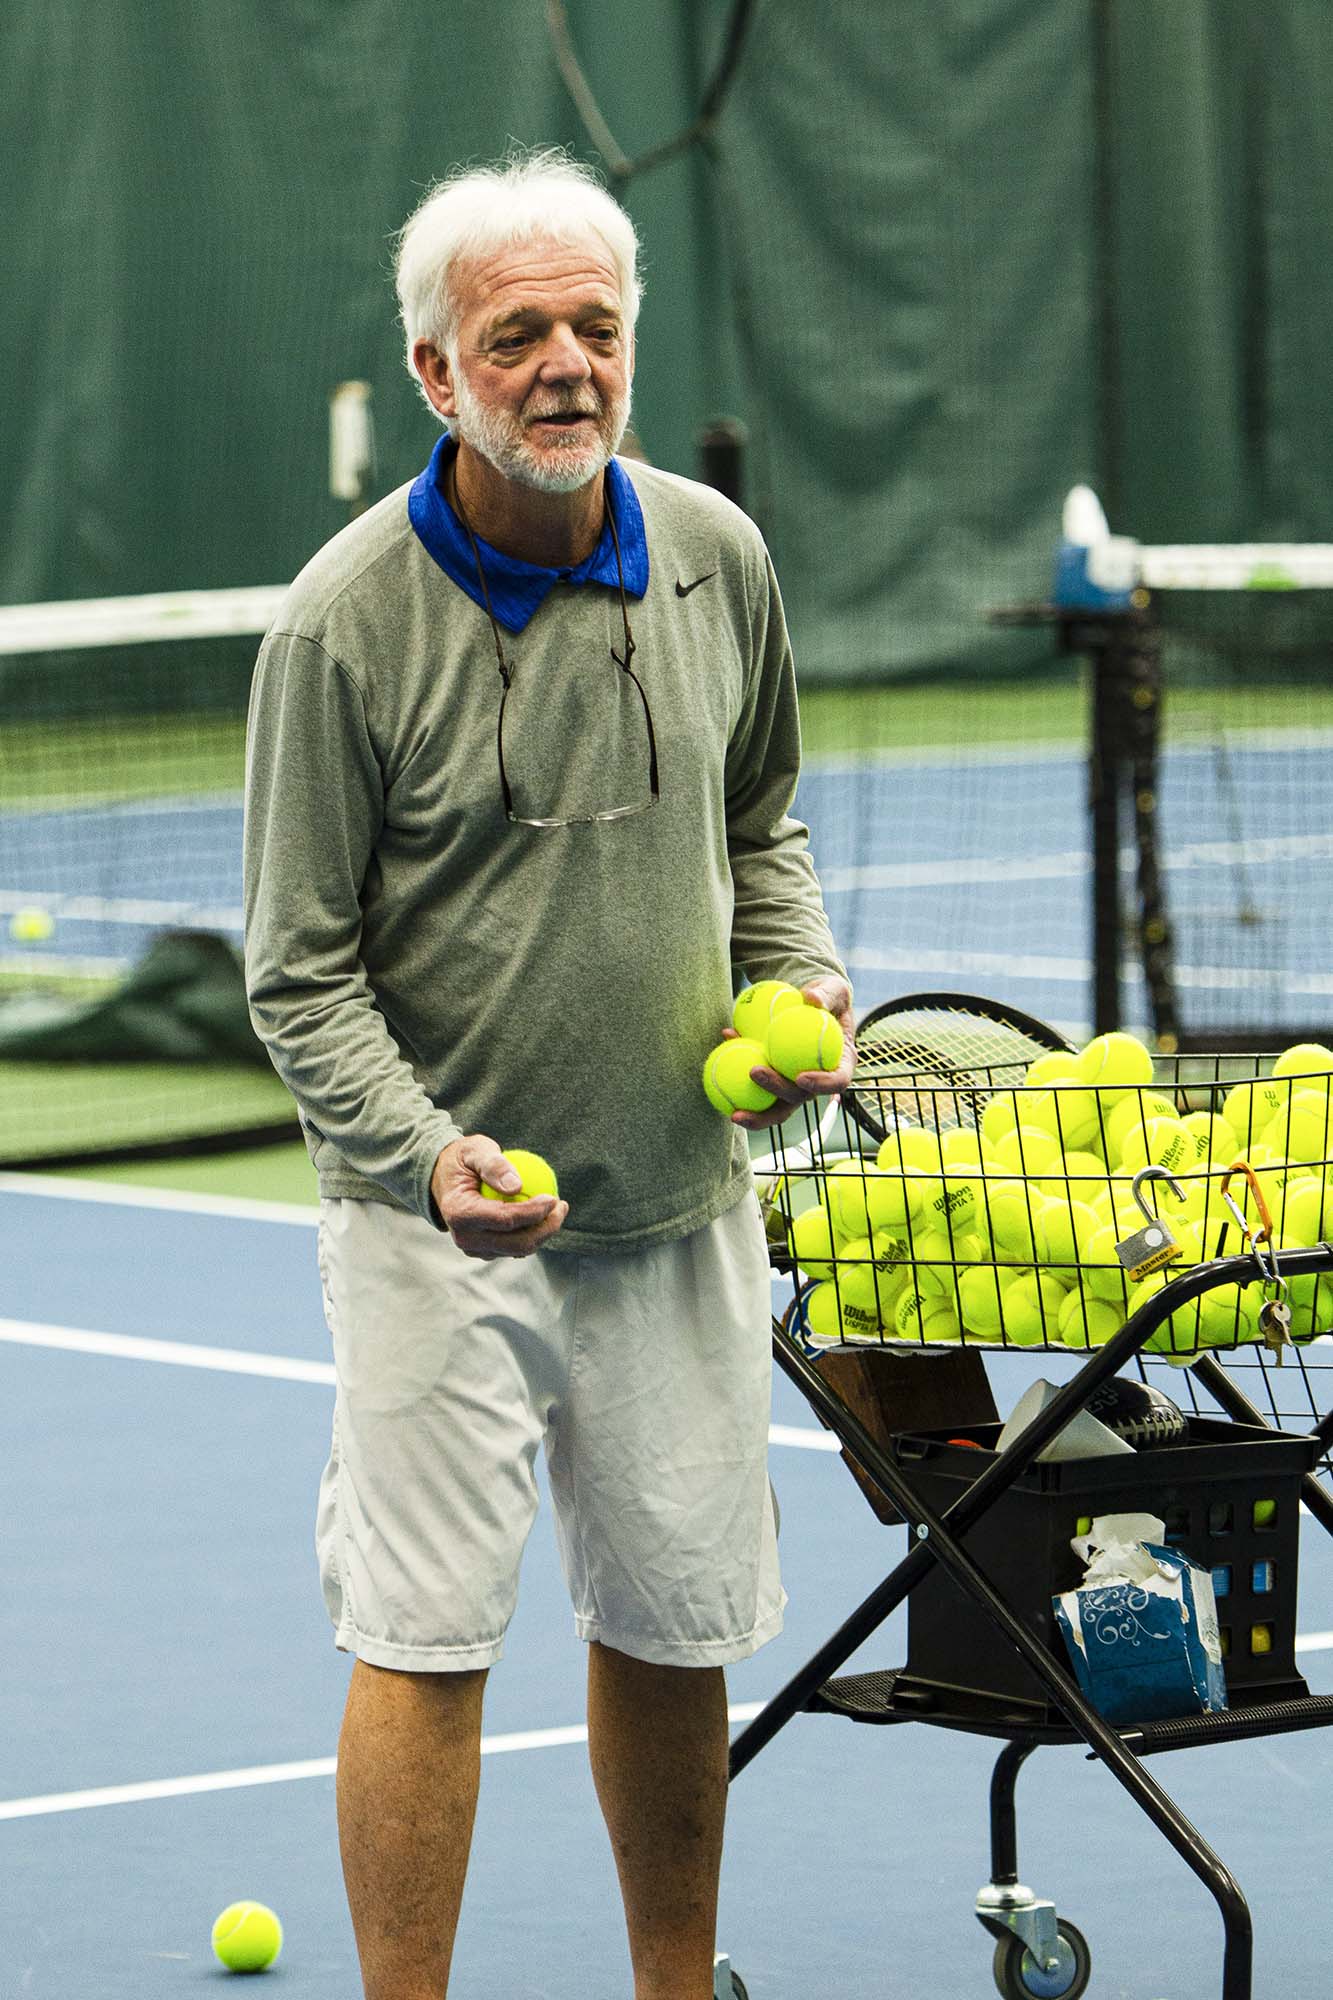 Manilla collecting tennis balls to place back in the tennis ball cart